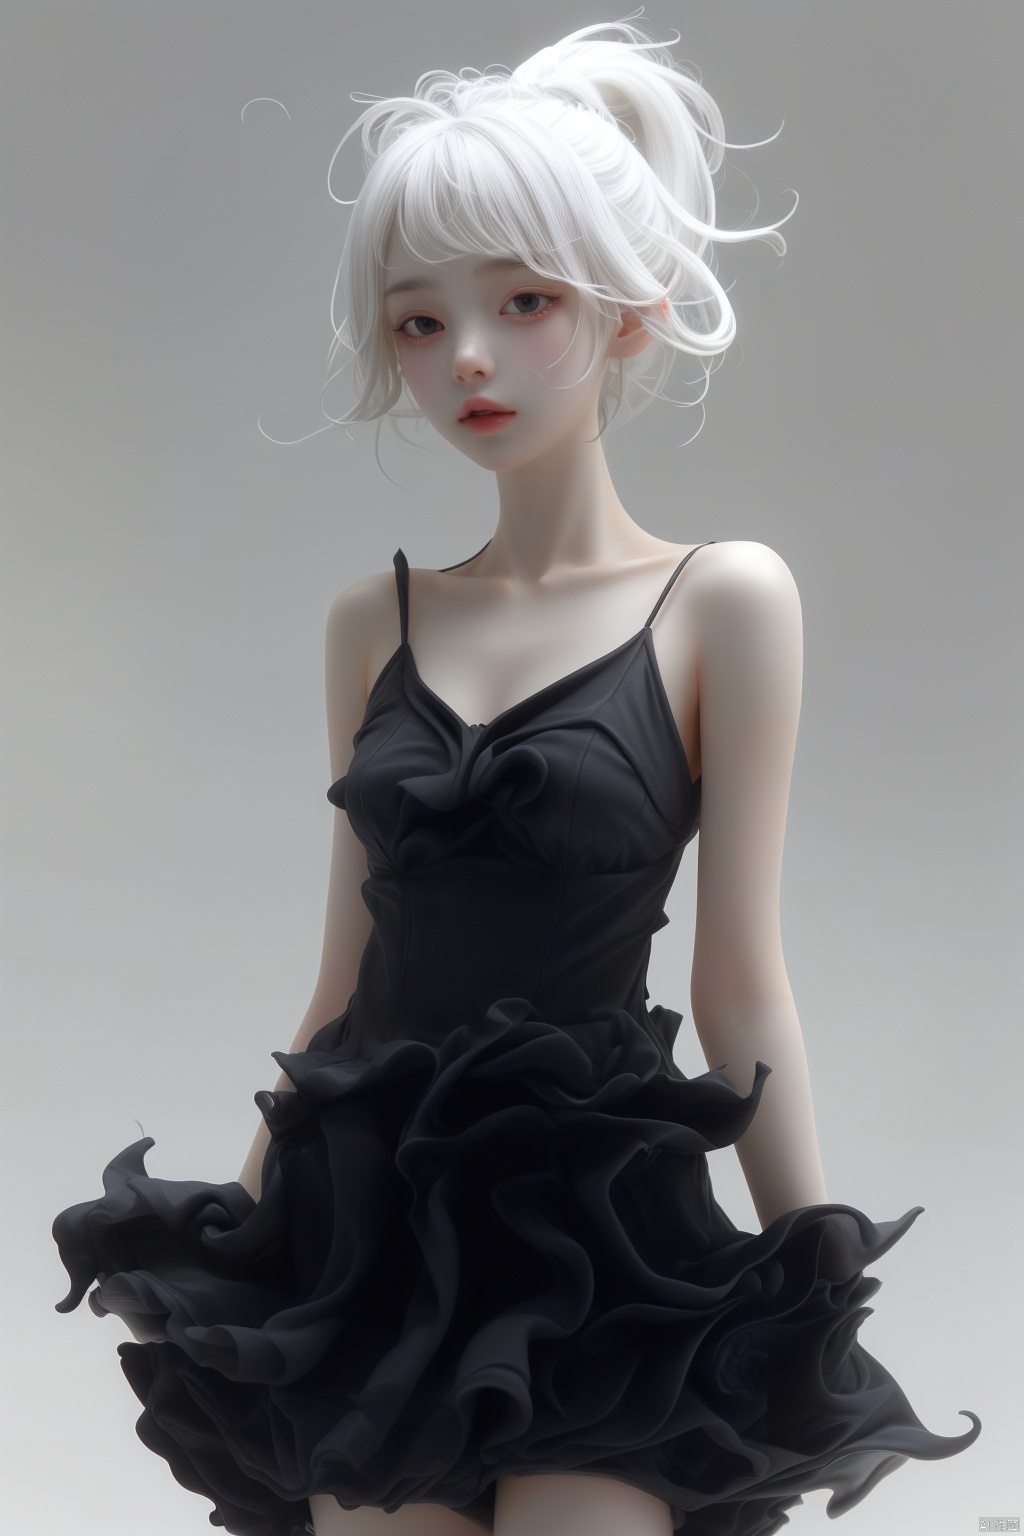  anancq,a girl with black dress and white hair,